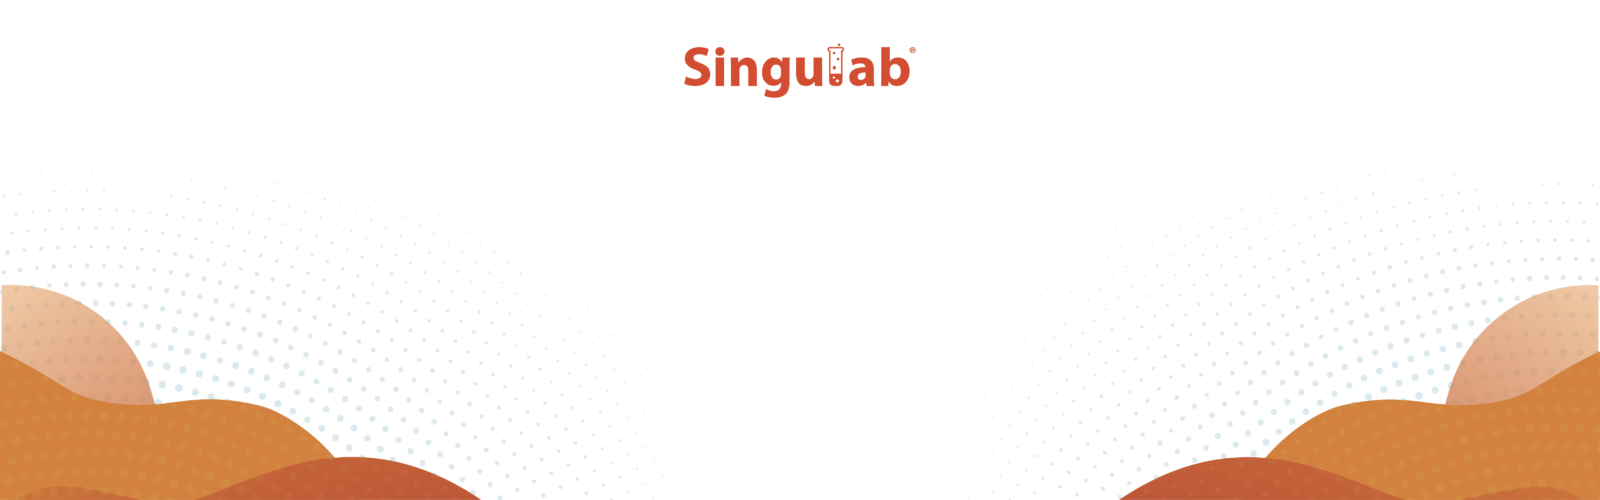 SinguLab® Announces Integration with PointClickCare